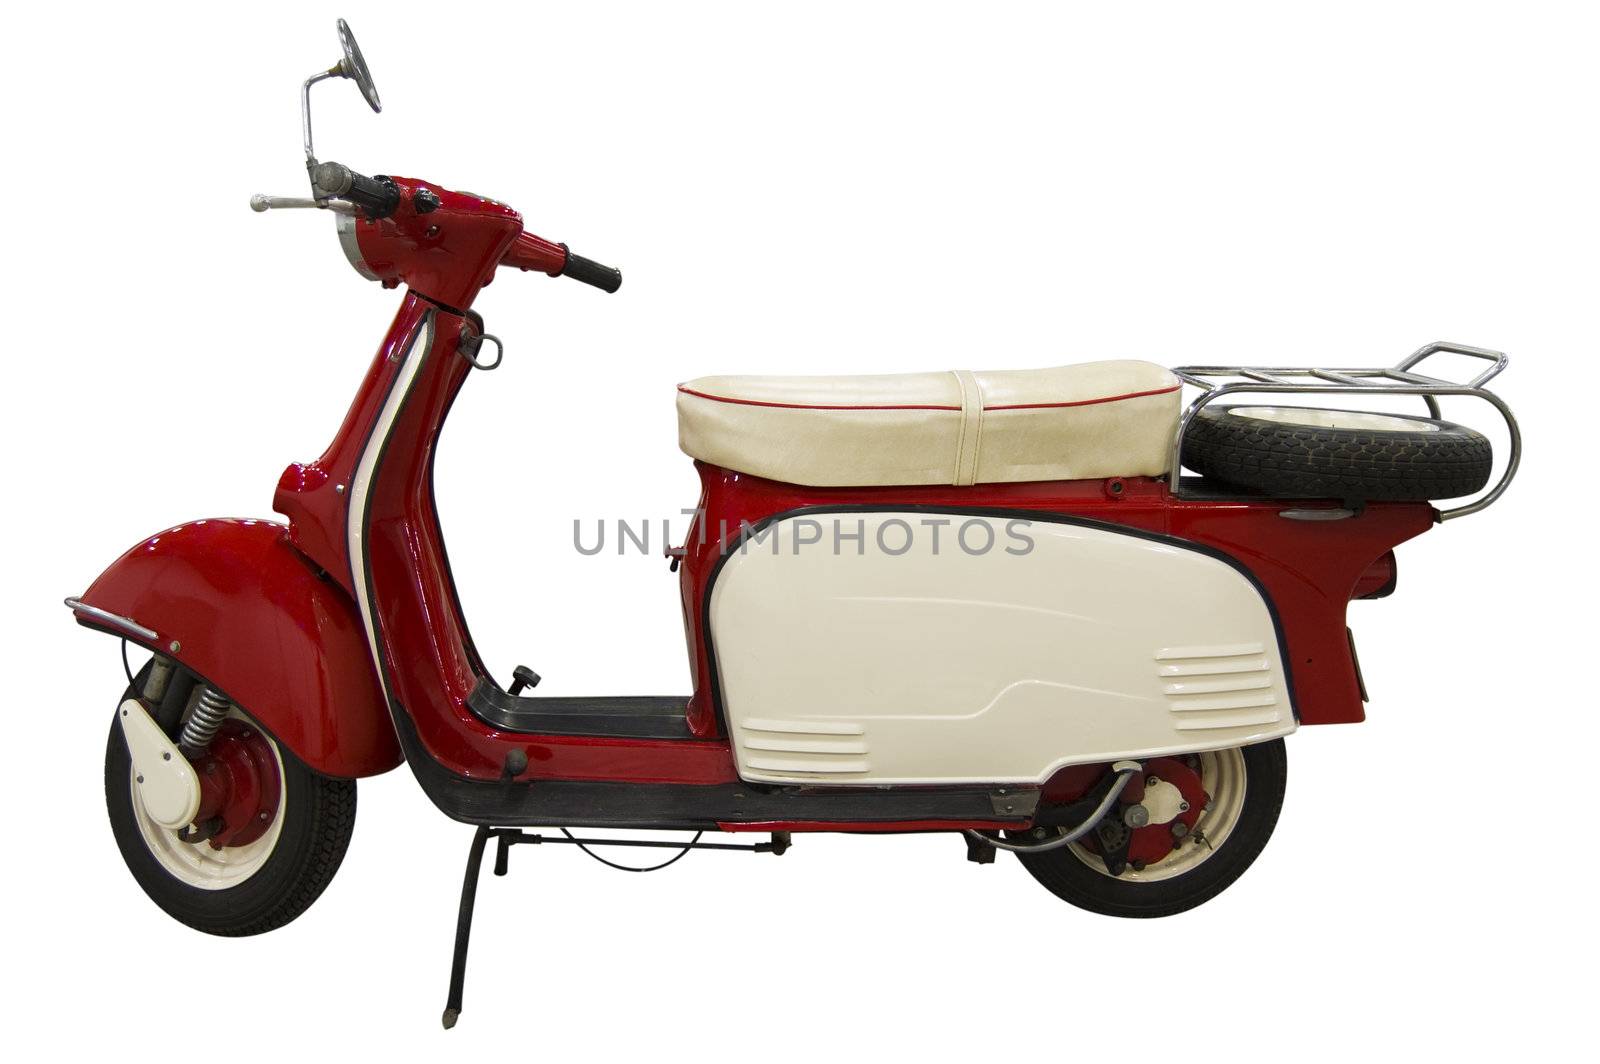 Vintage red and white scooter (path included) by simas2